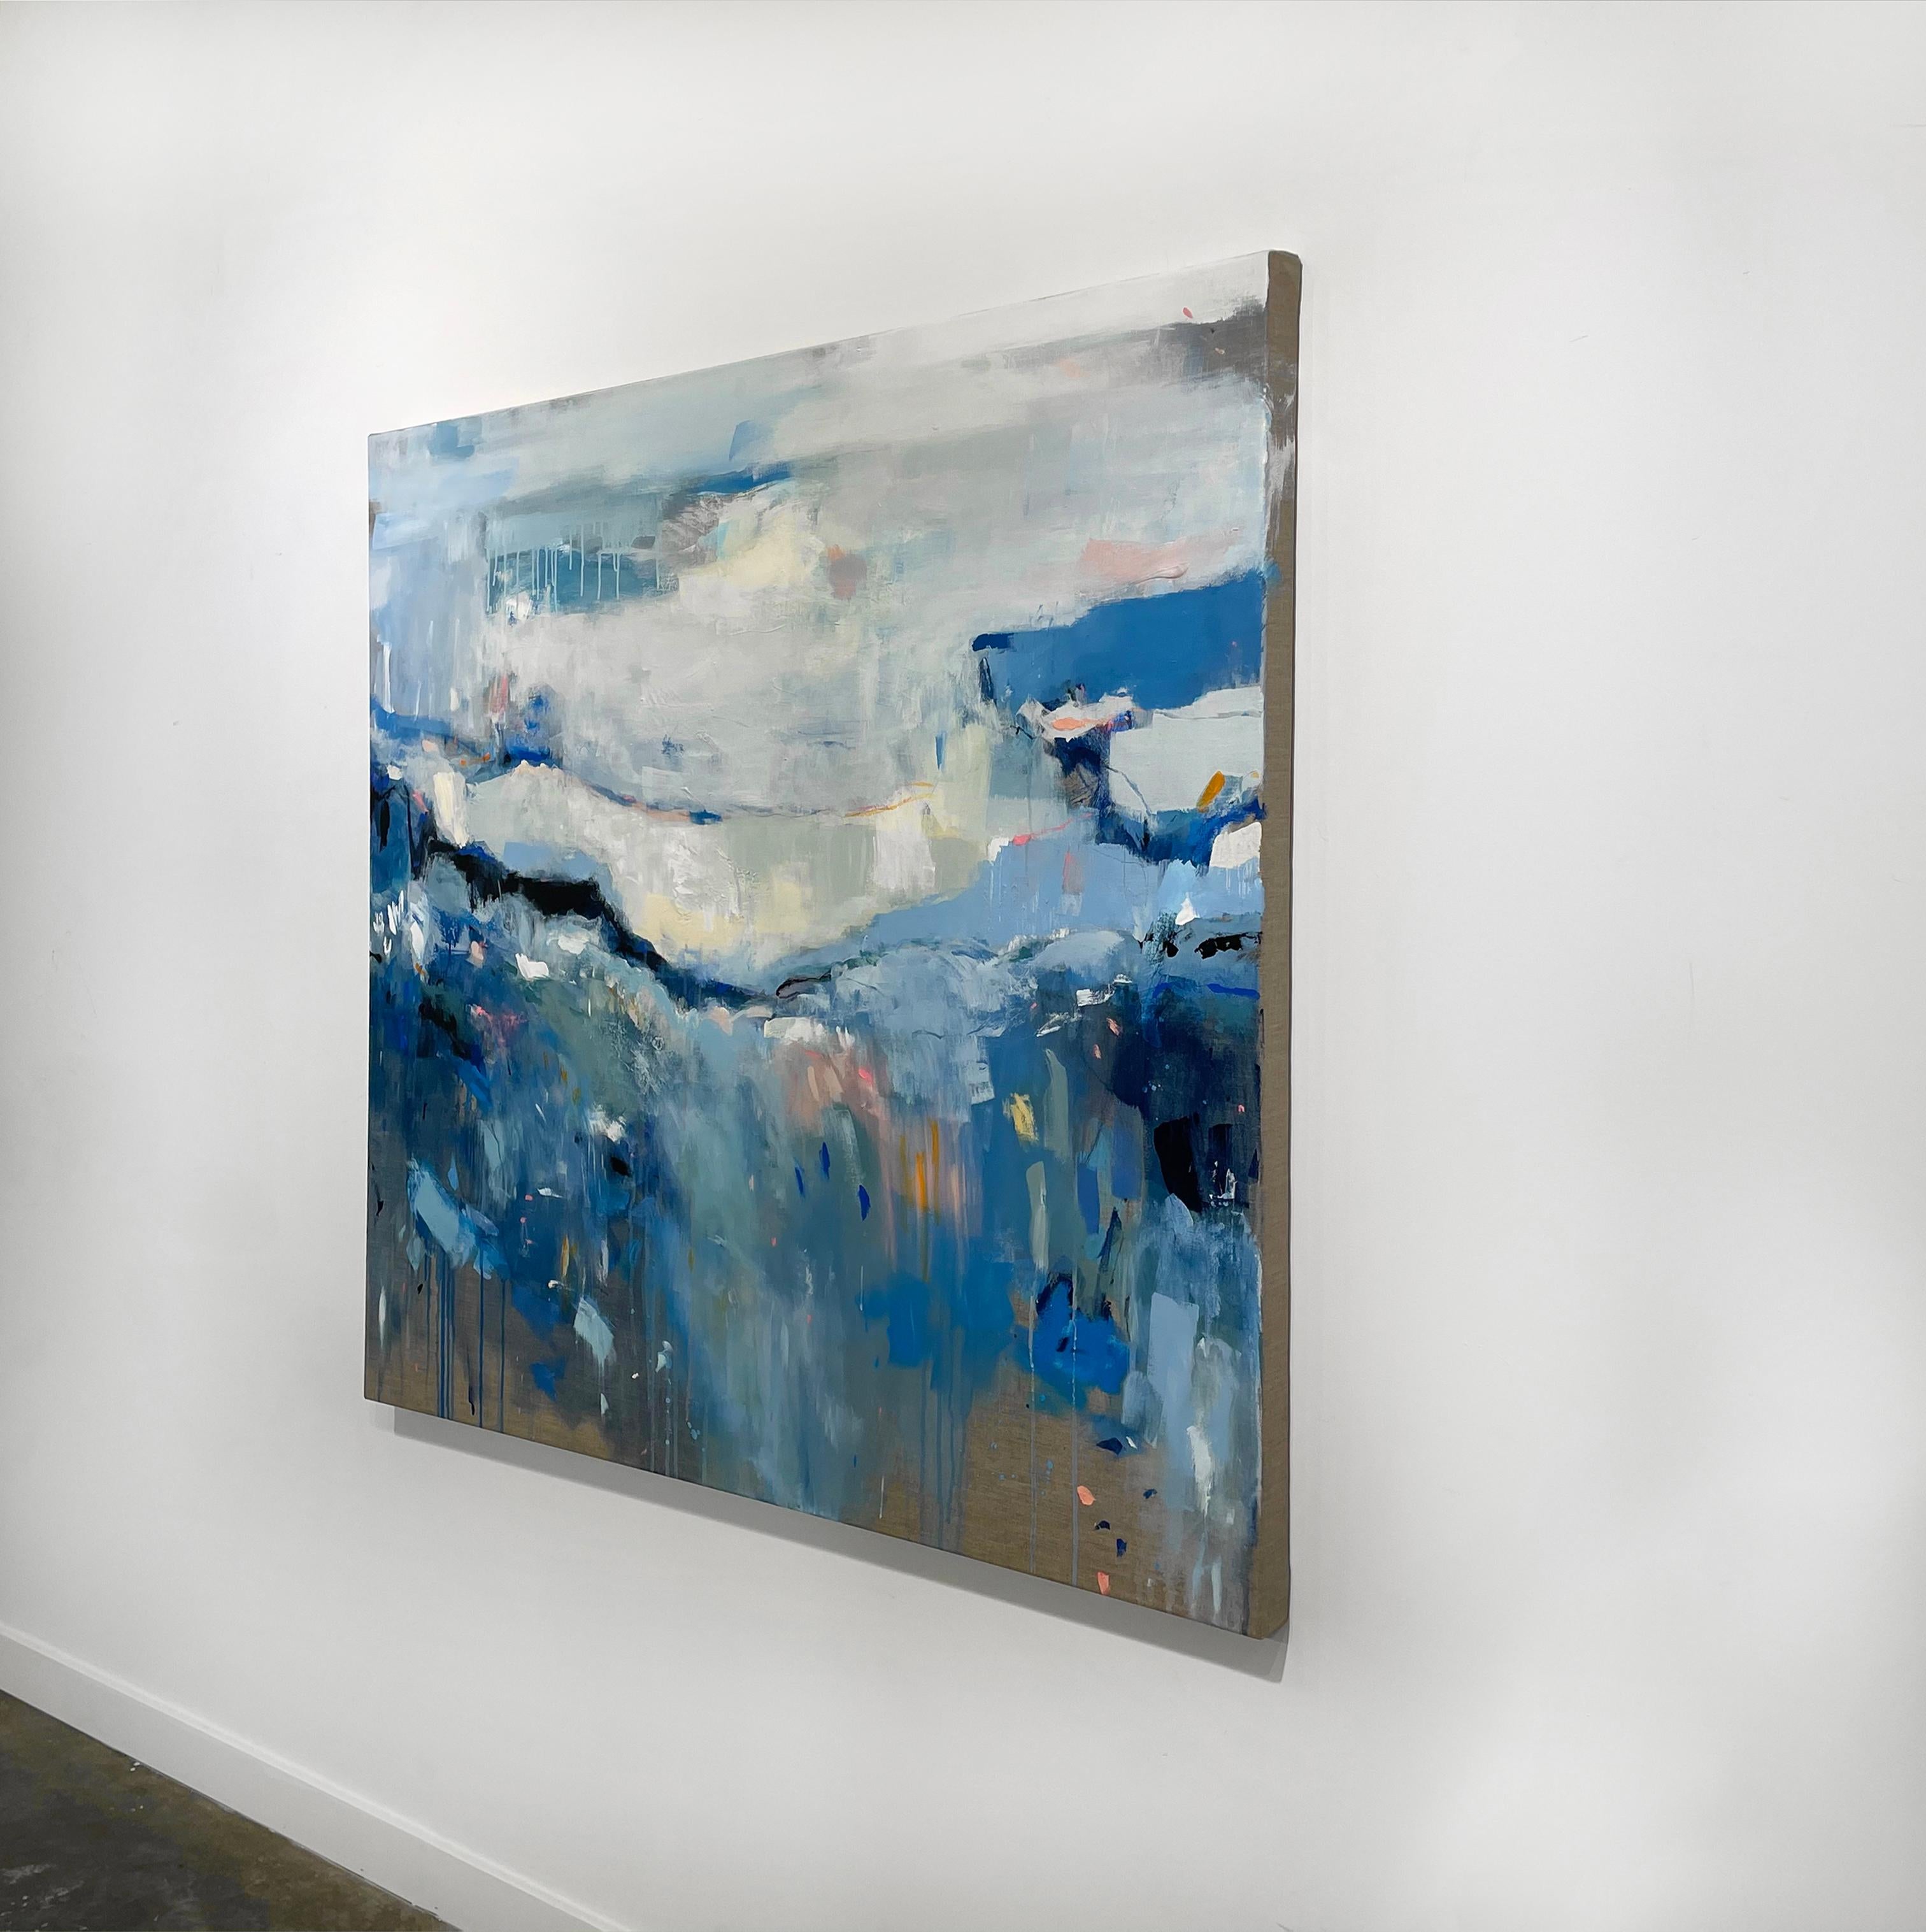 This contemporary abstract painting by Kelly Rossetti is made with mixed media on linen. With a cool blue palette, it mixes varying shades and hues of blue with lighter creme and off white, with deep, near black accents and pops of warm colors like